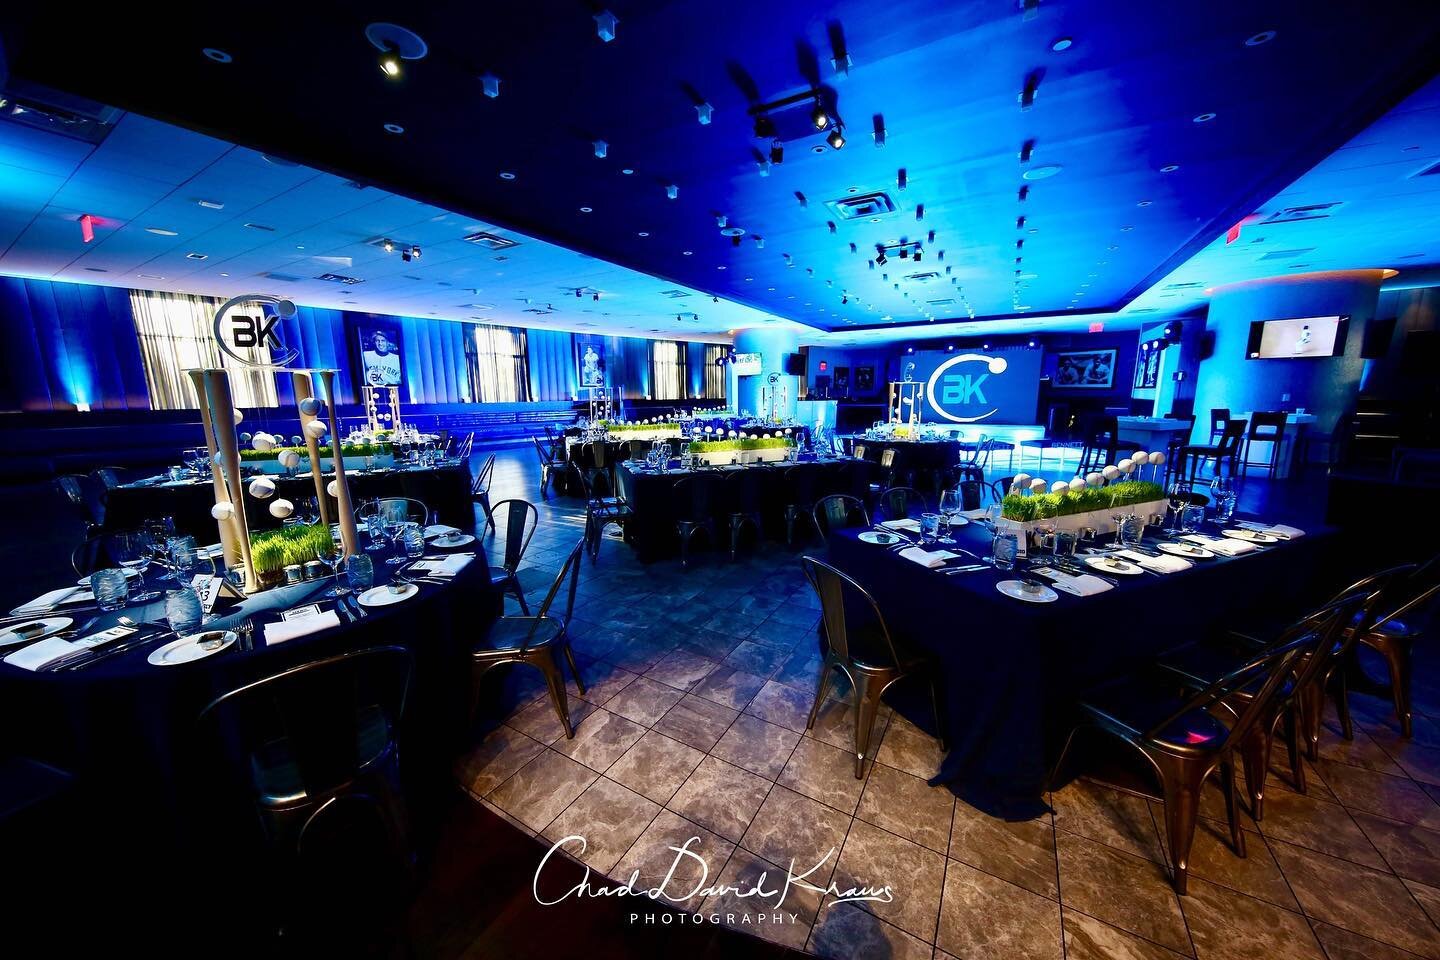 We have had our share of exciting venues and Yankee stadium was yet another amazing one! We celebrated BK in a big way! 
Event Planner: @esp_creative 
Lighting/Entertainment/Production: @esp_creative 
Venue/Food: @yankeestadium 
Photography: @chadkra